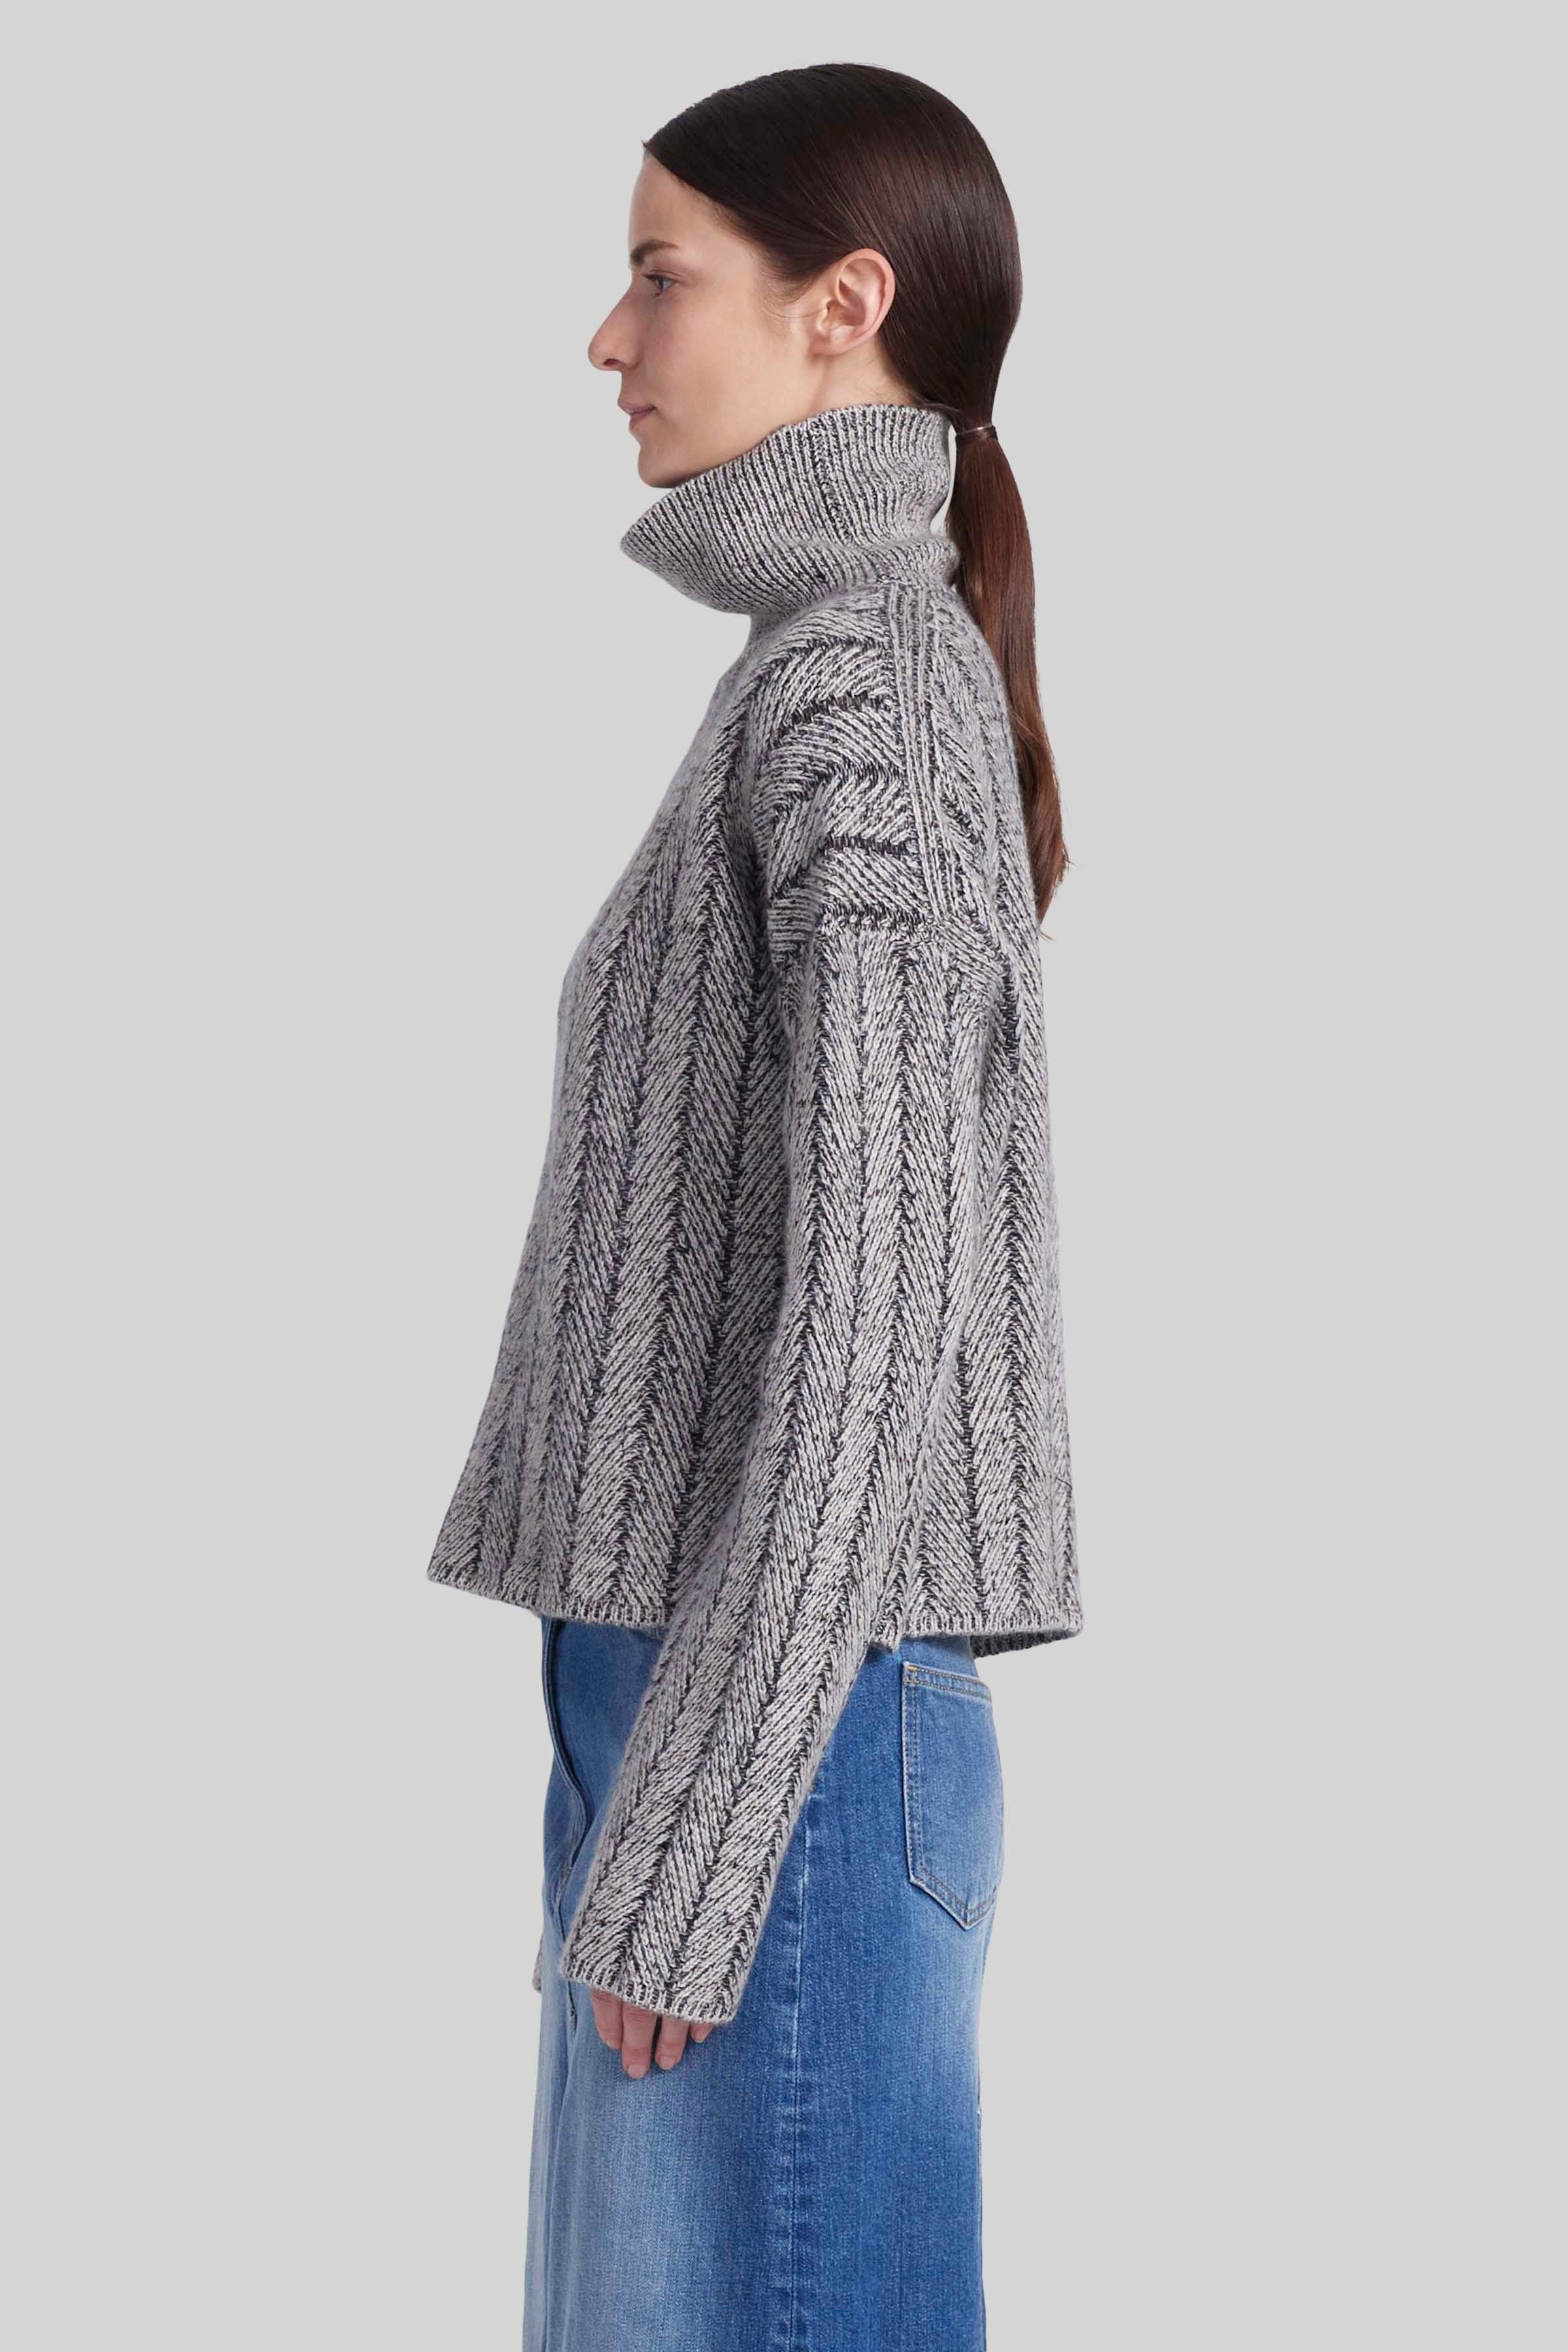 'TERENCE' SWEATER - 3